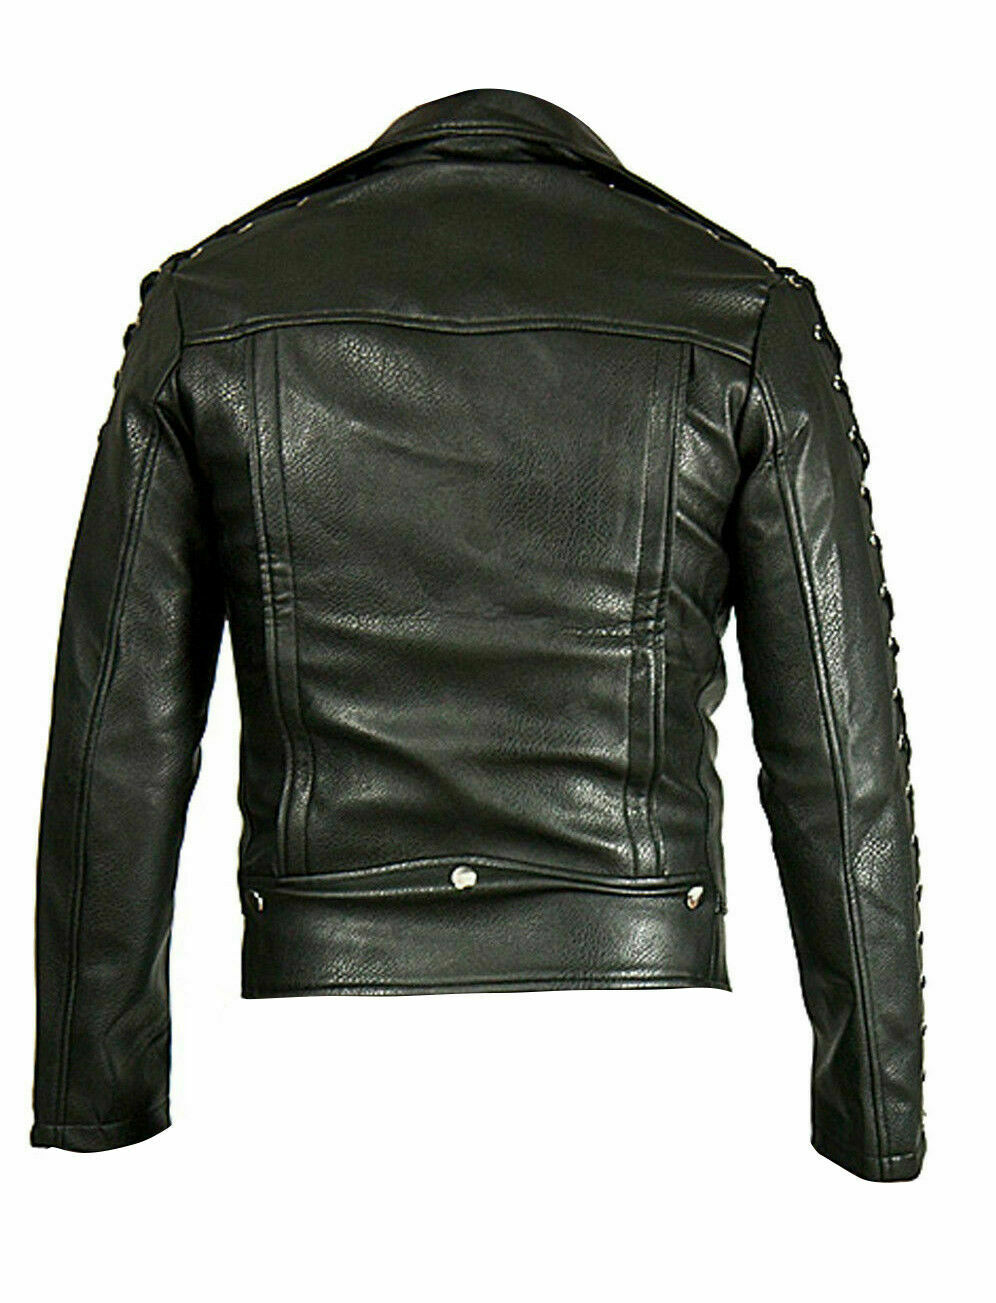 Men's Real Leather Bikers Laces Up Jacket Cowhide Leather Bikers Jacket Black - Luxurena Leather